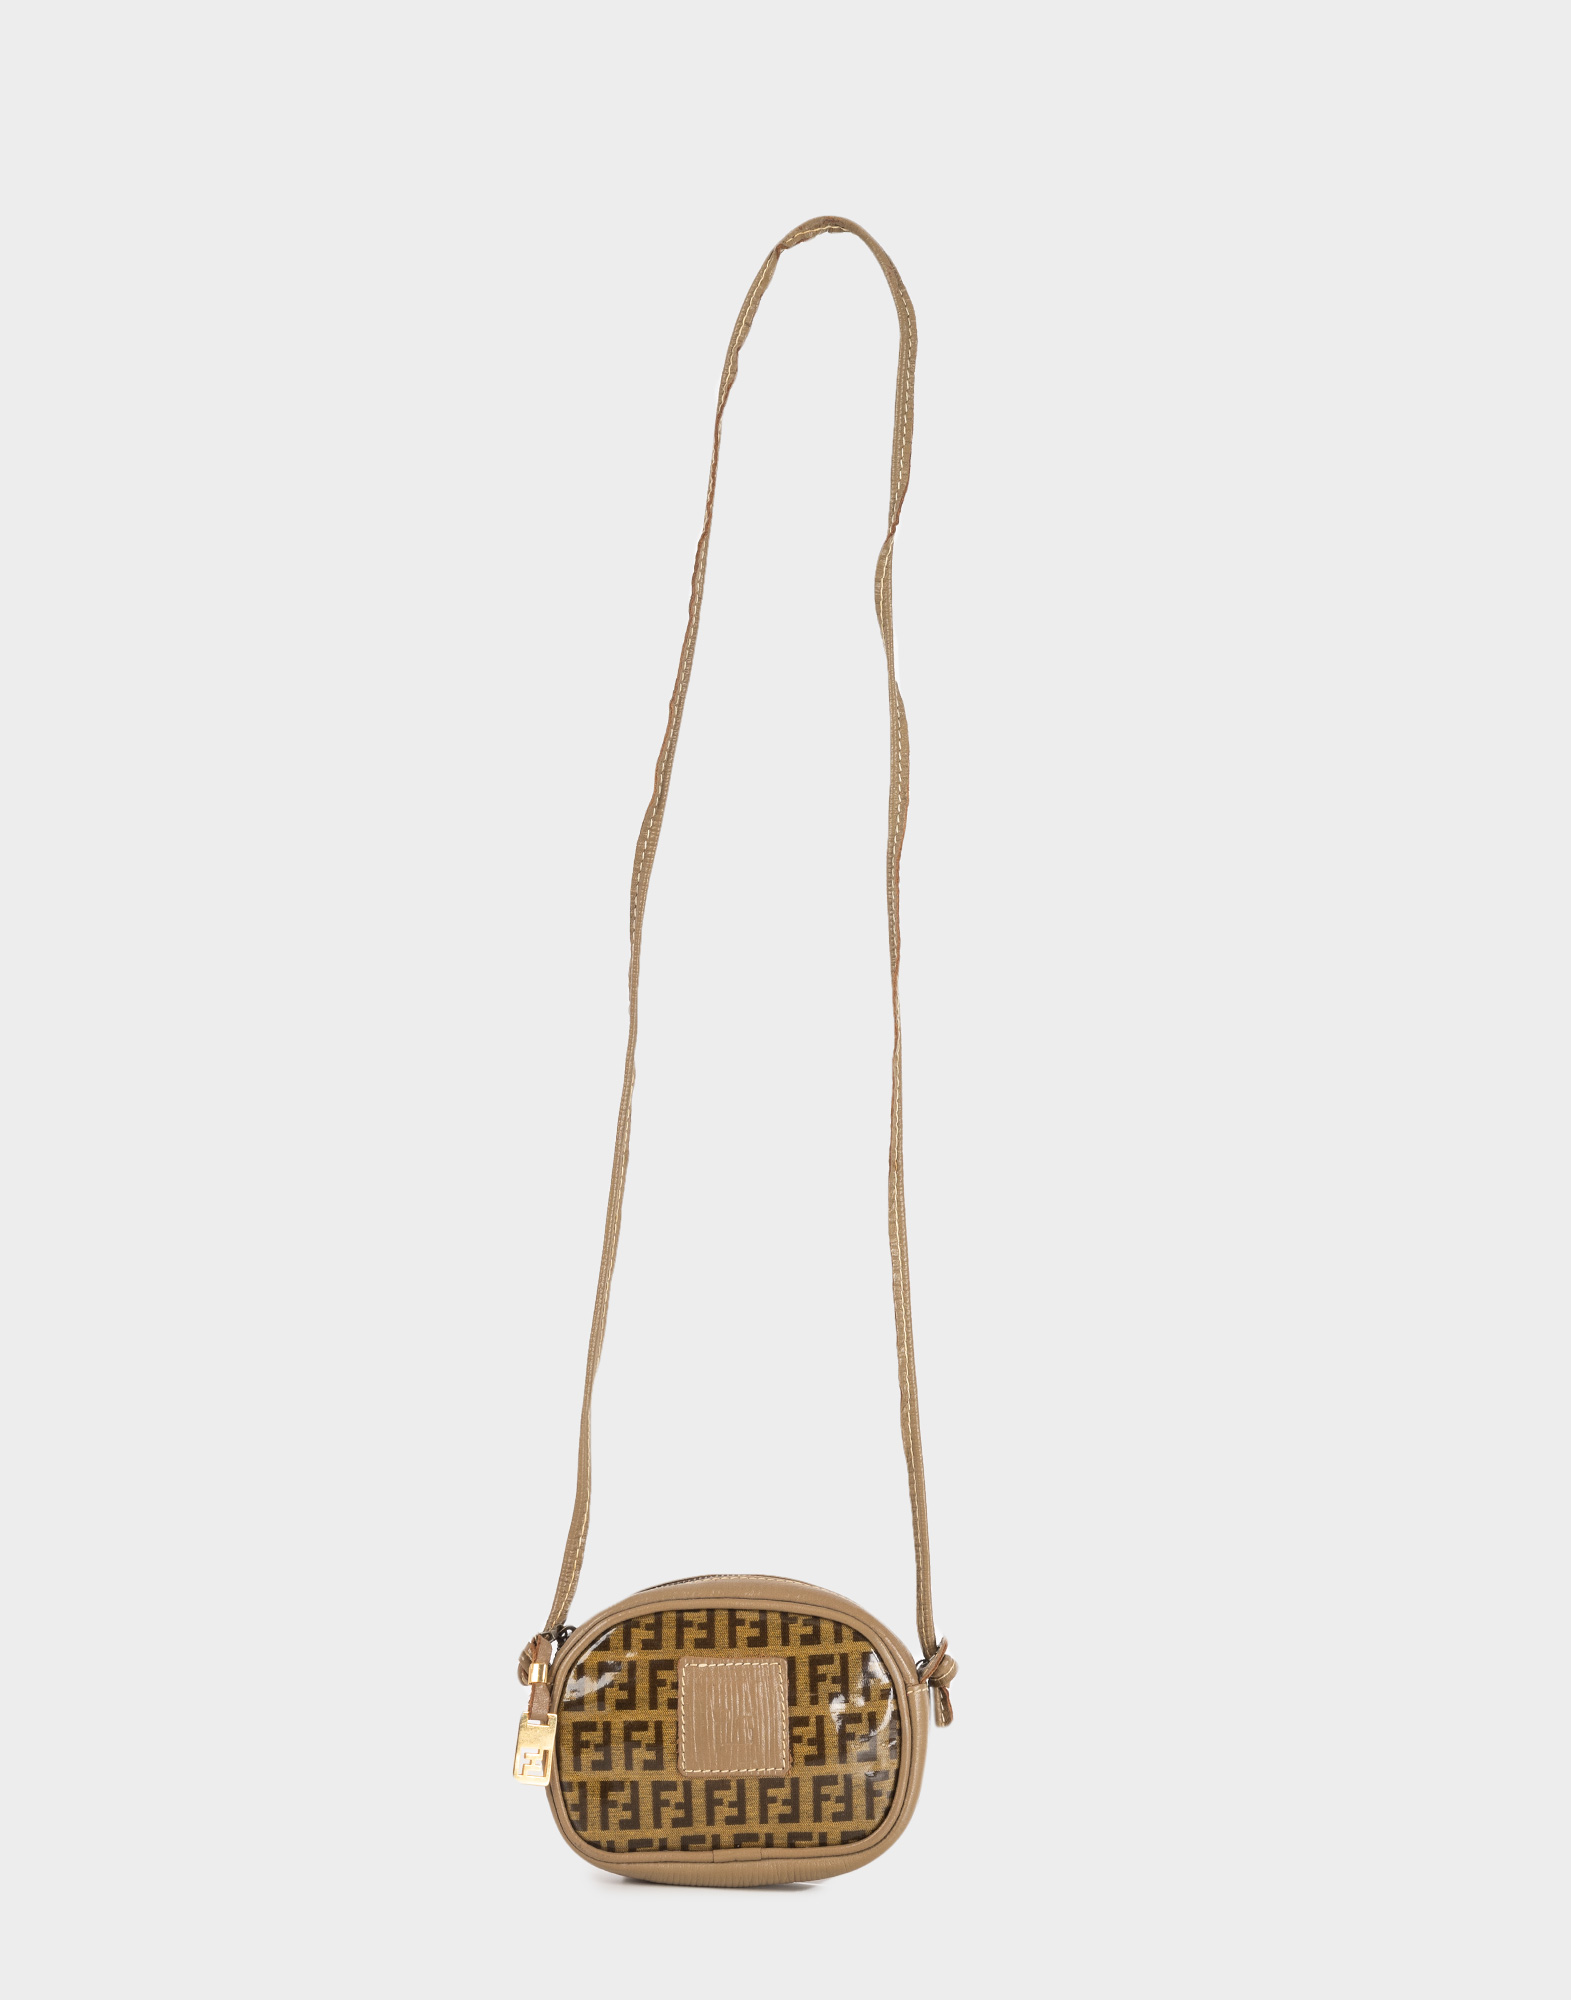 Fendi women's minibag in beige patent leather with brown monogram pattern, thin shoulder strap and gold FF pendant